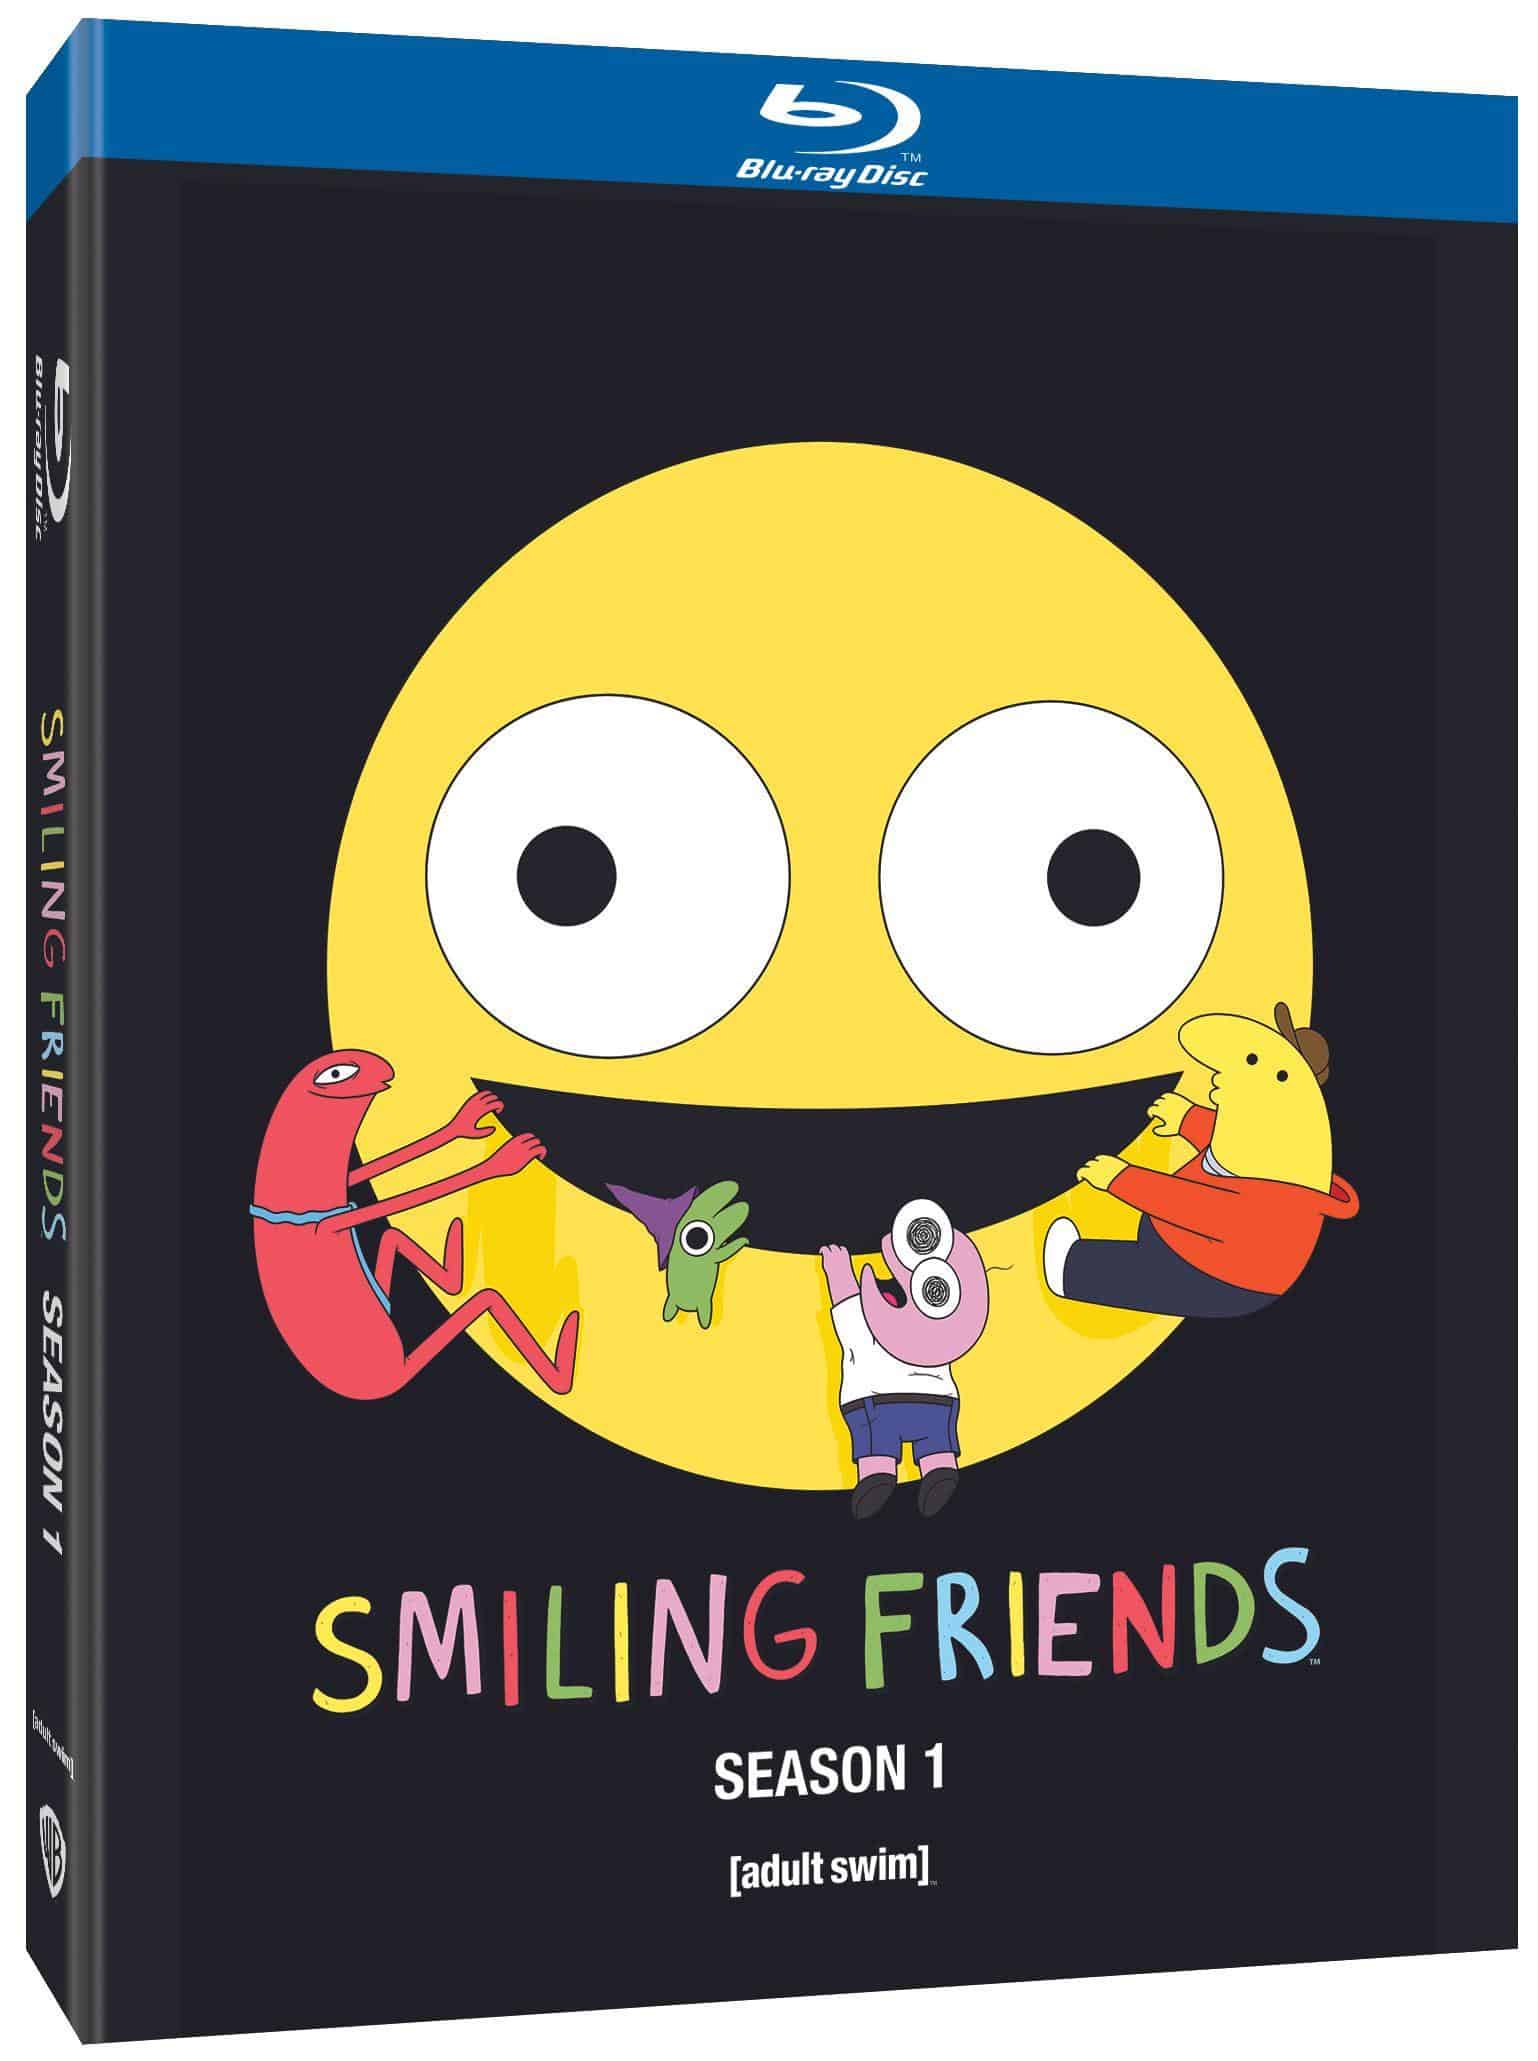 Get Ready to Grin! Join the Smiling Friends on their Whimsical 1st Season Blu-ray 19